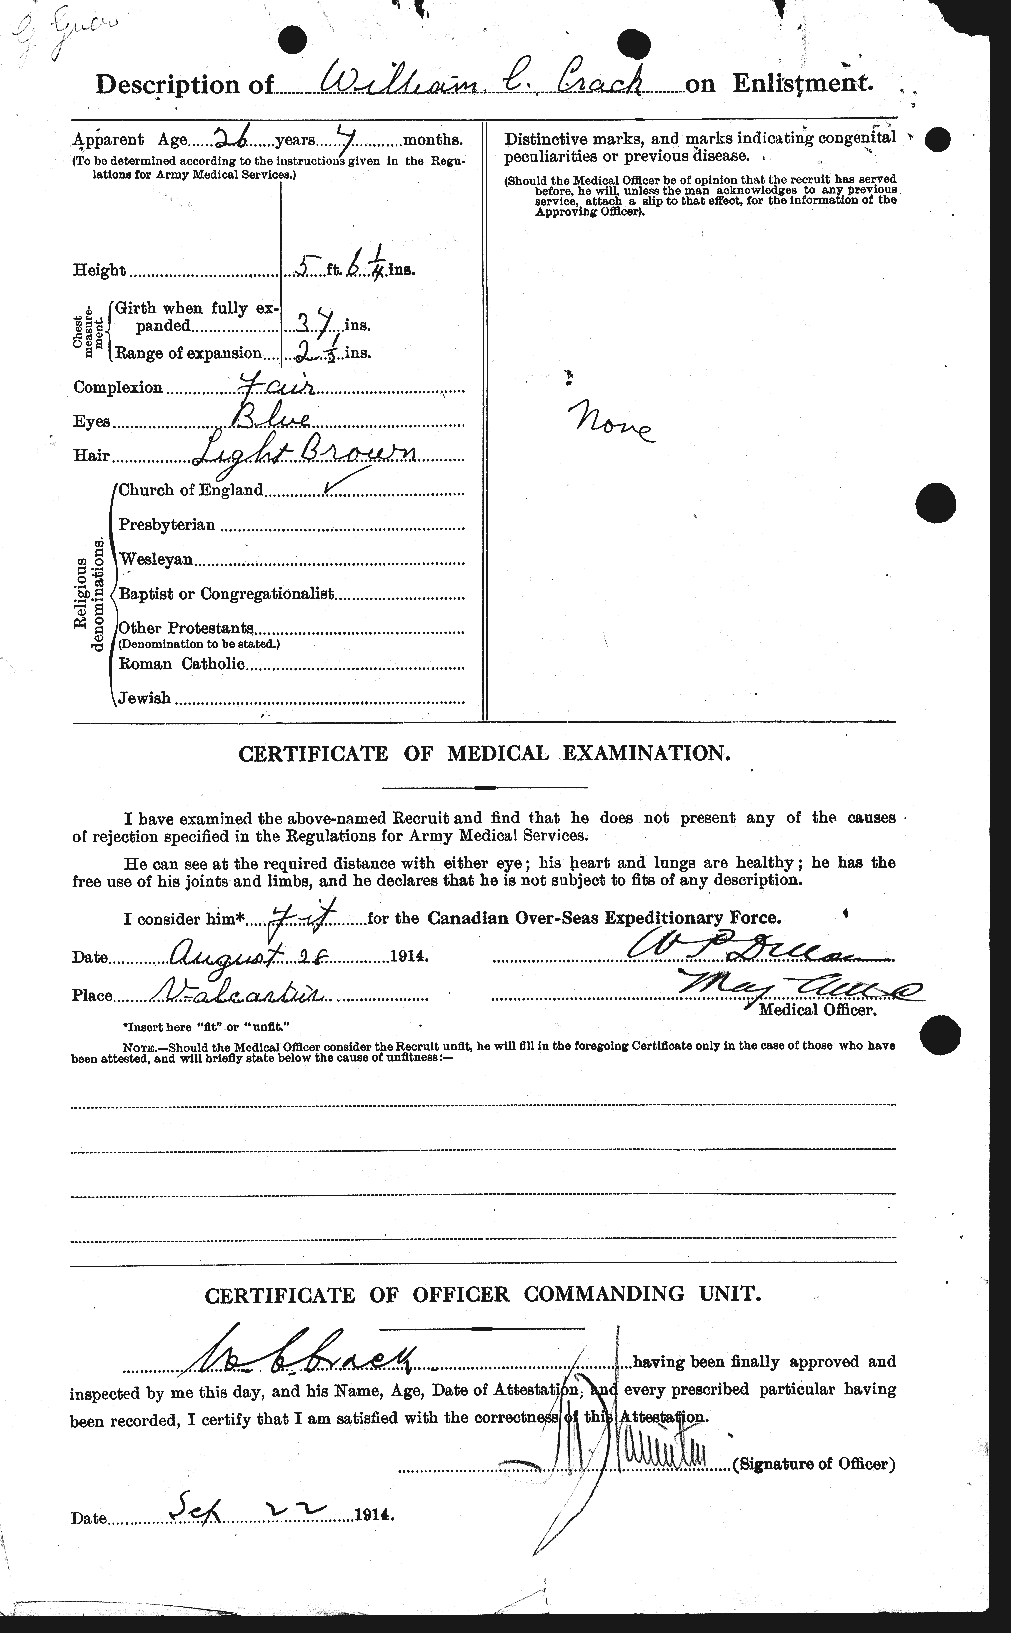 Personnel Records of the First World War - CEF 063293b